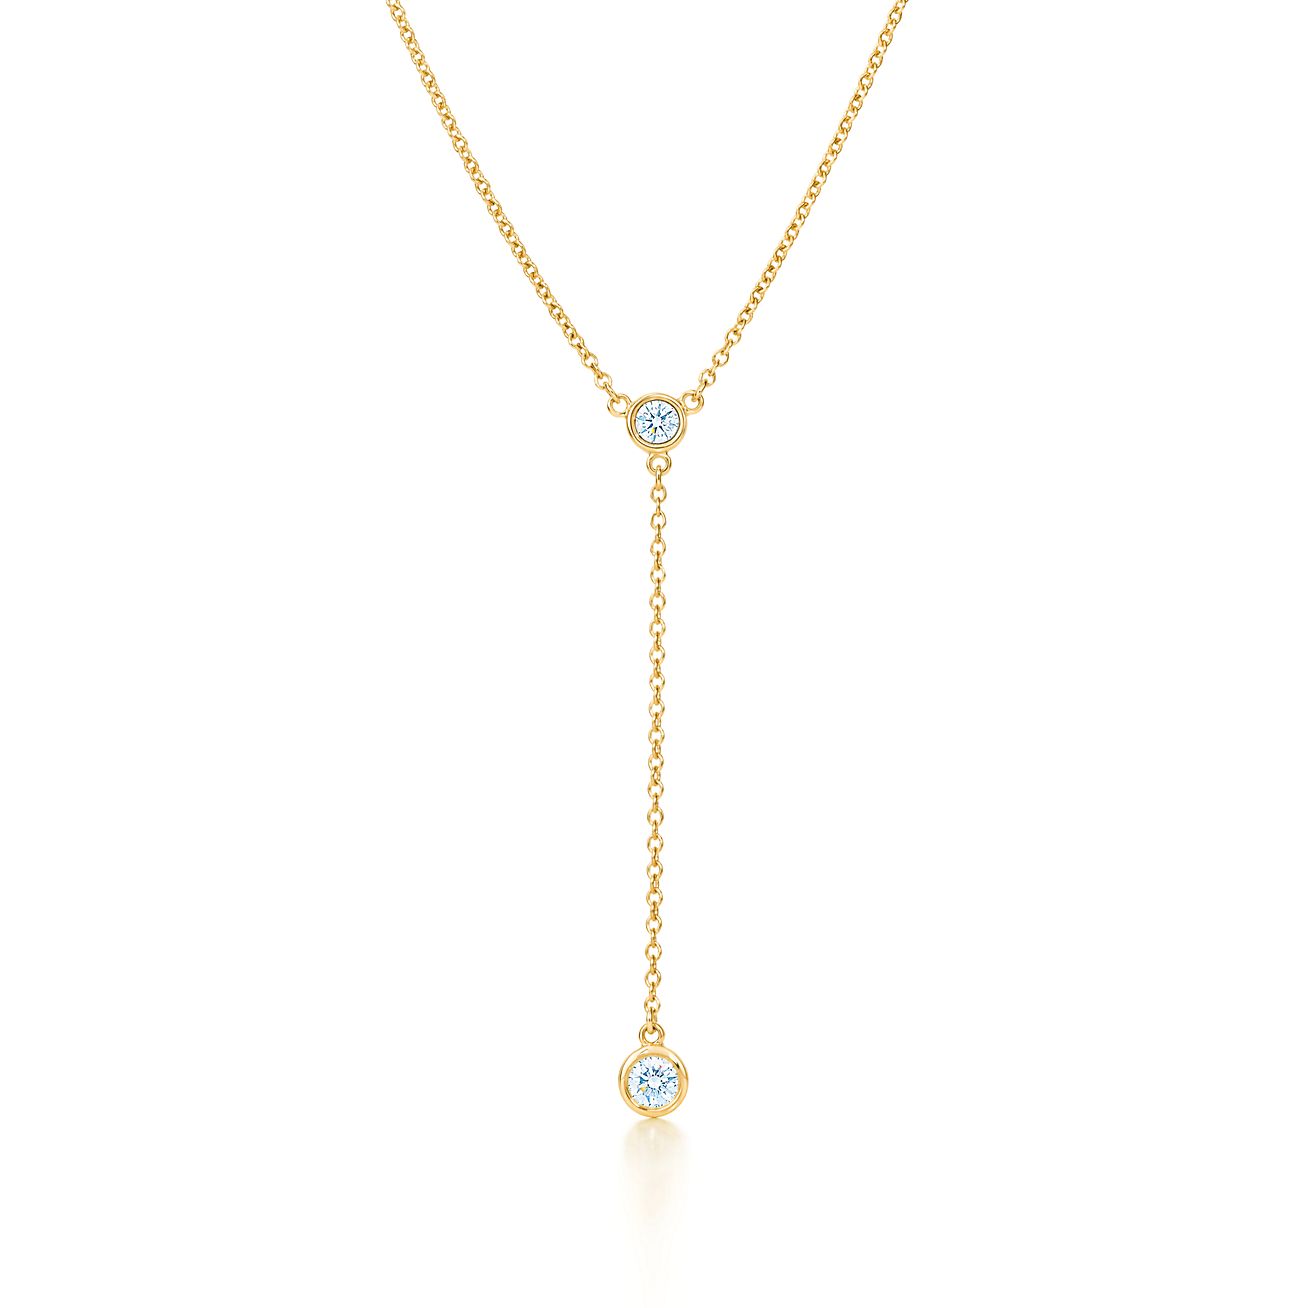 Elsa Peretti® Diamonds by the Yard® necklace in 18k gold. | Tiffany & Co.